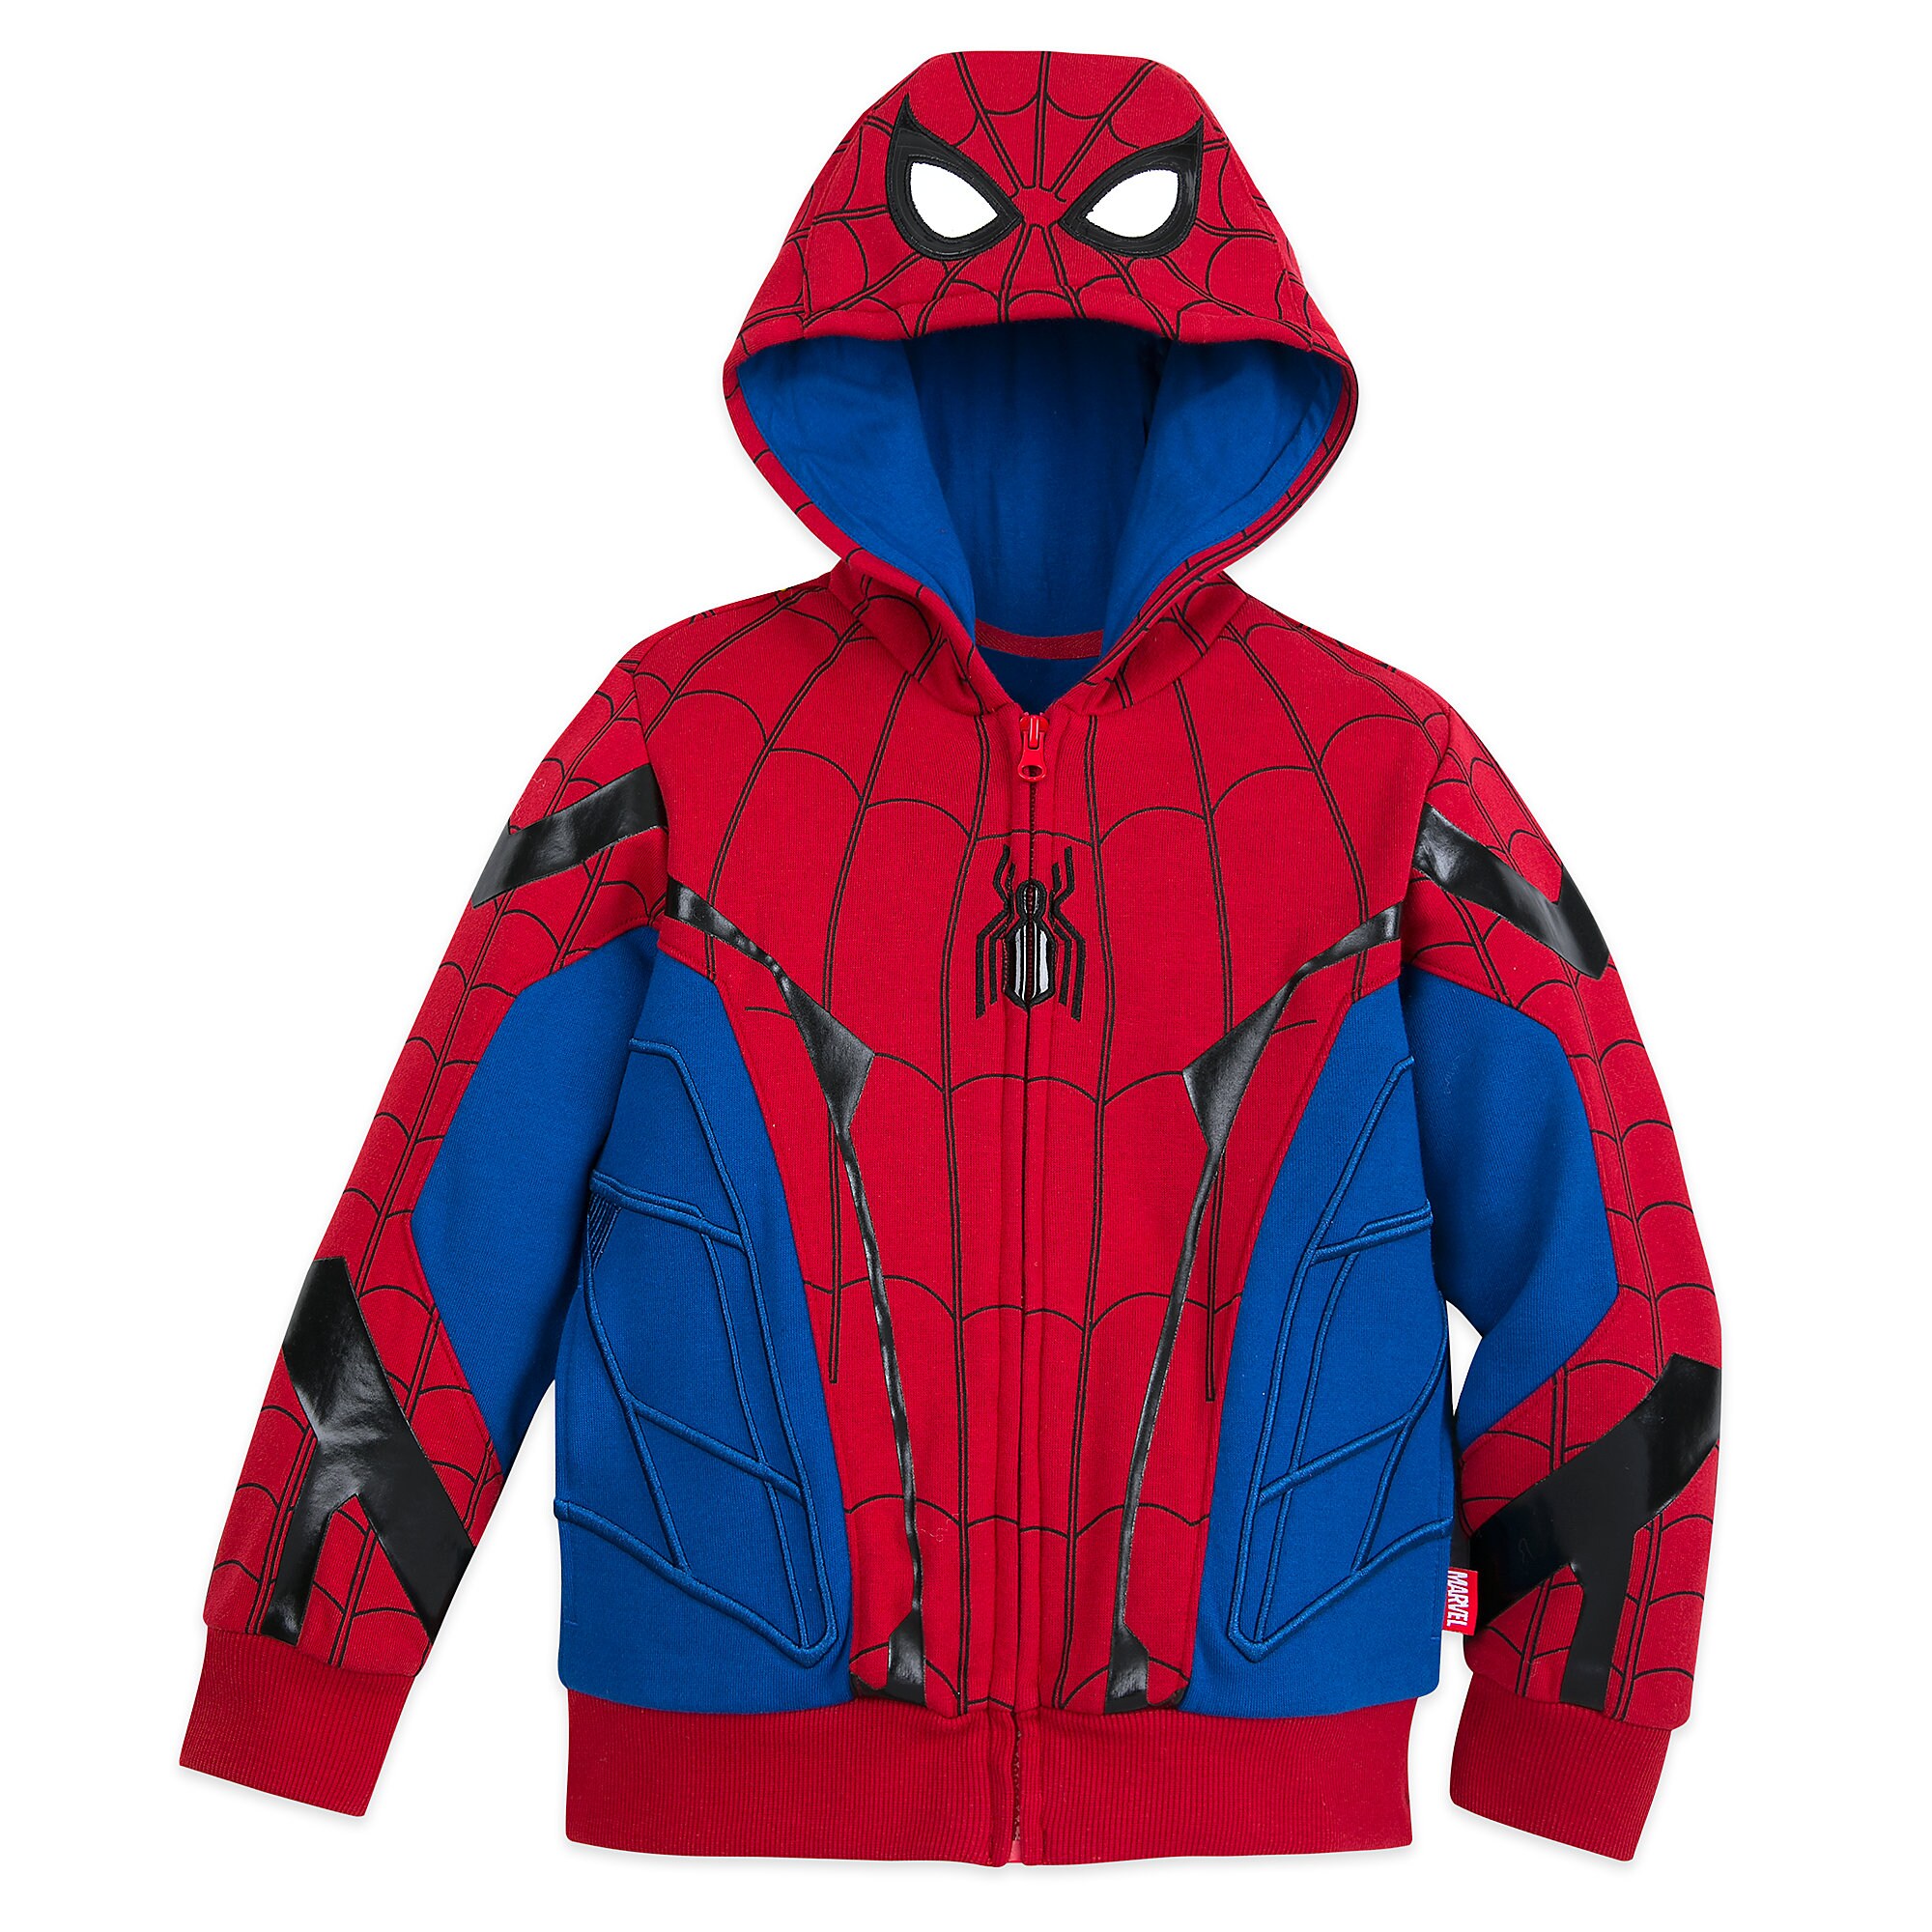 Spider-Man Hooded Jacket - Spider-Man: Far from Home